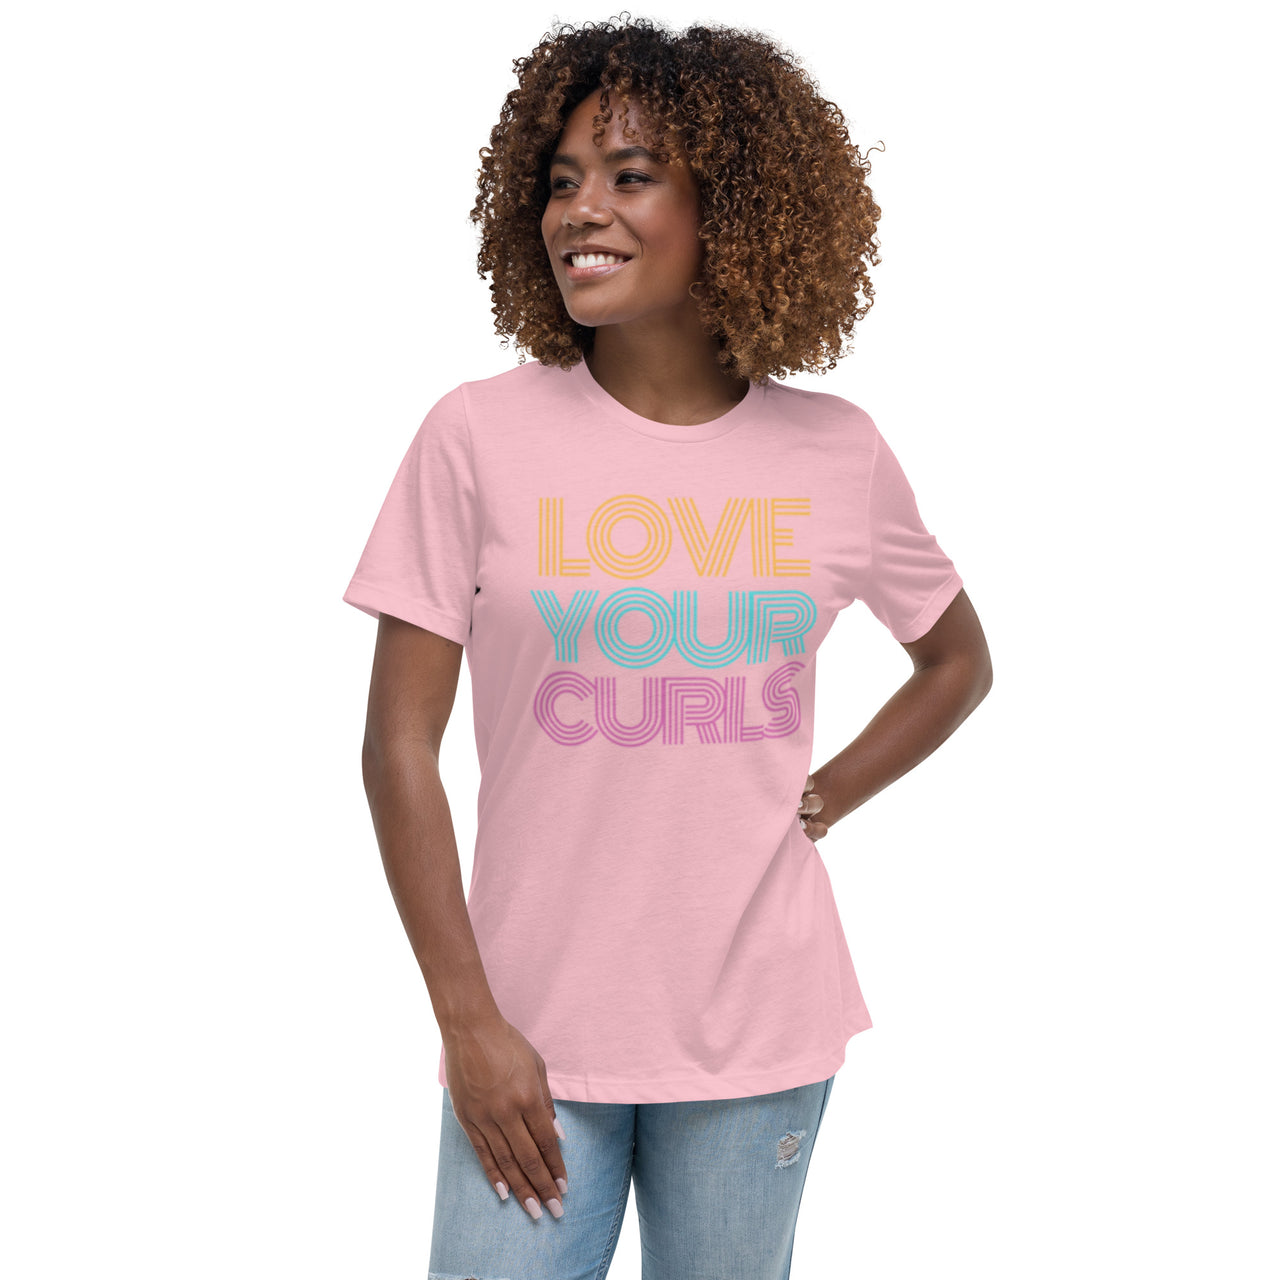 Love Your Curls - T-Shirt